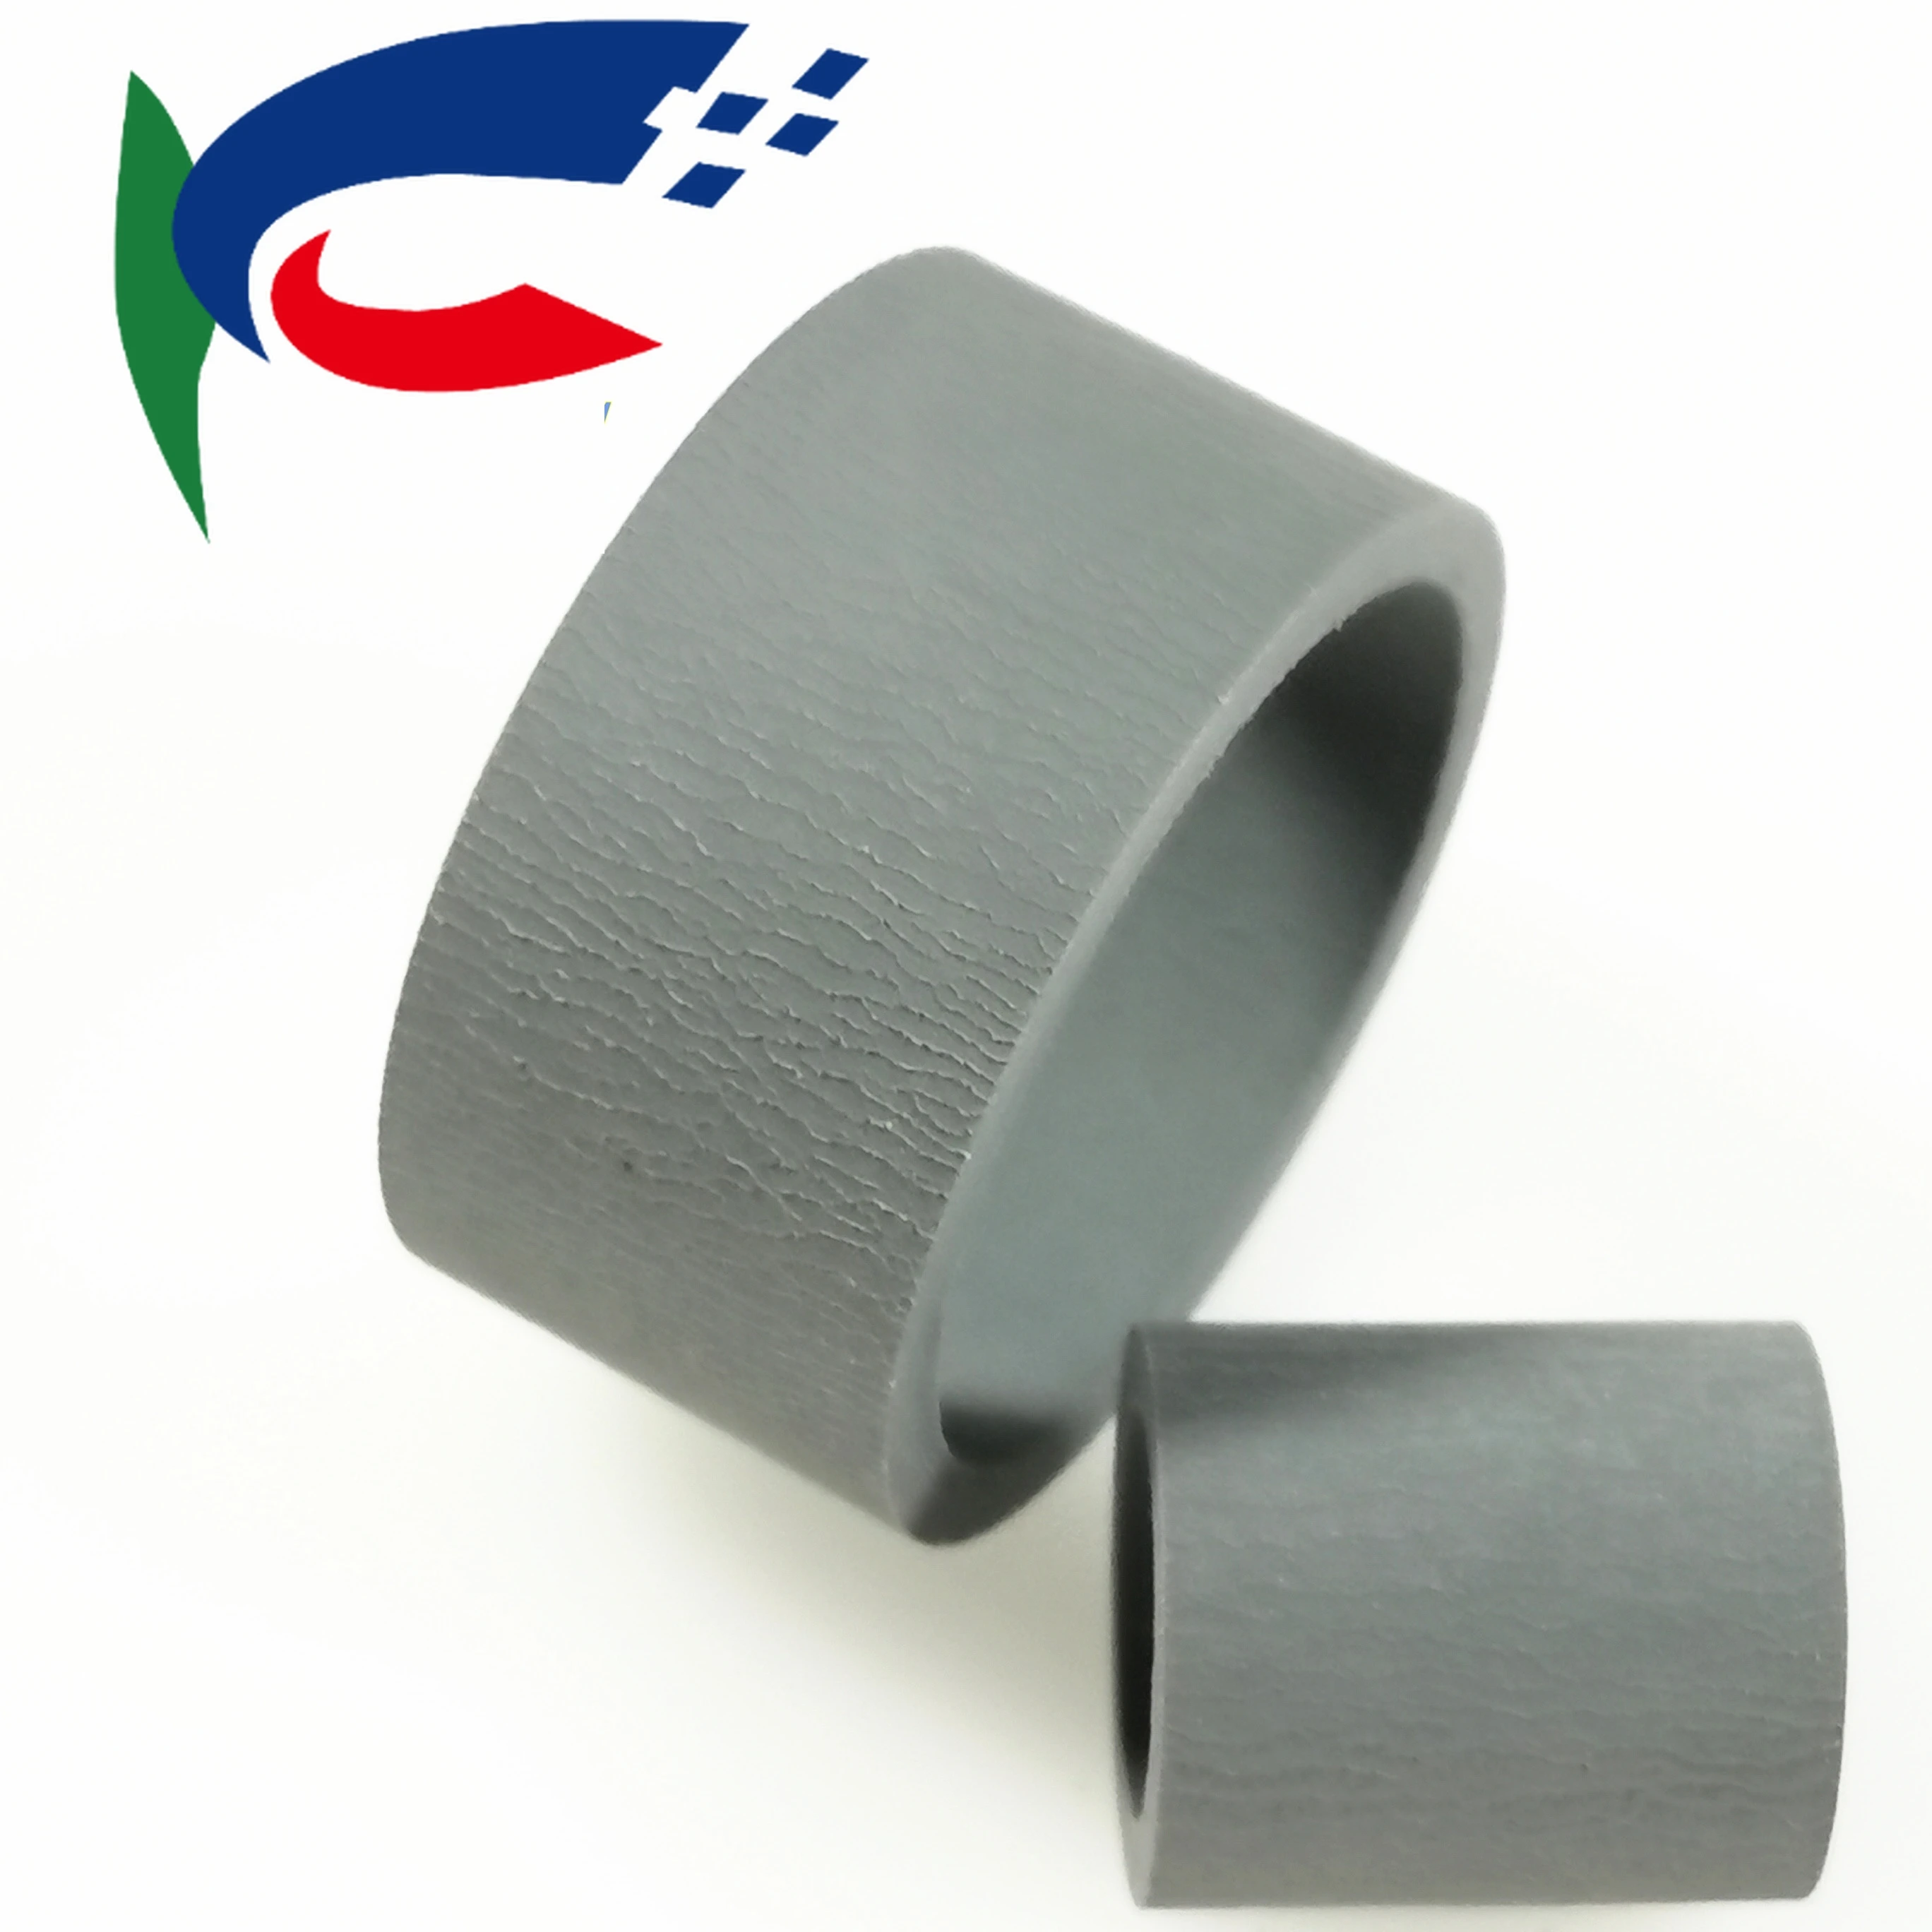 

20 set rubber Pickup Roller Feed Separation for Epson R250 R270 R280 285 R290 R330 R390 T50 A50 RX610 RX590 L801 L800 L805